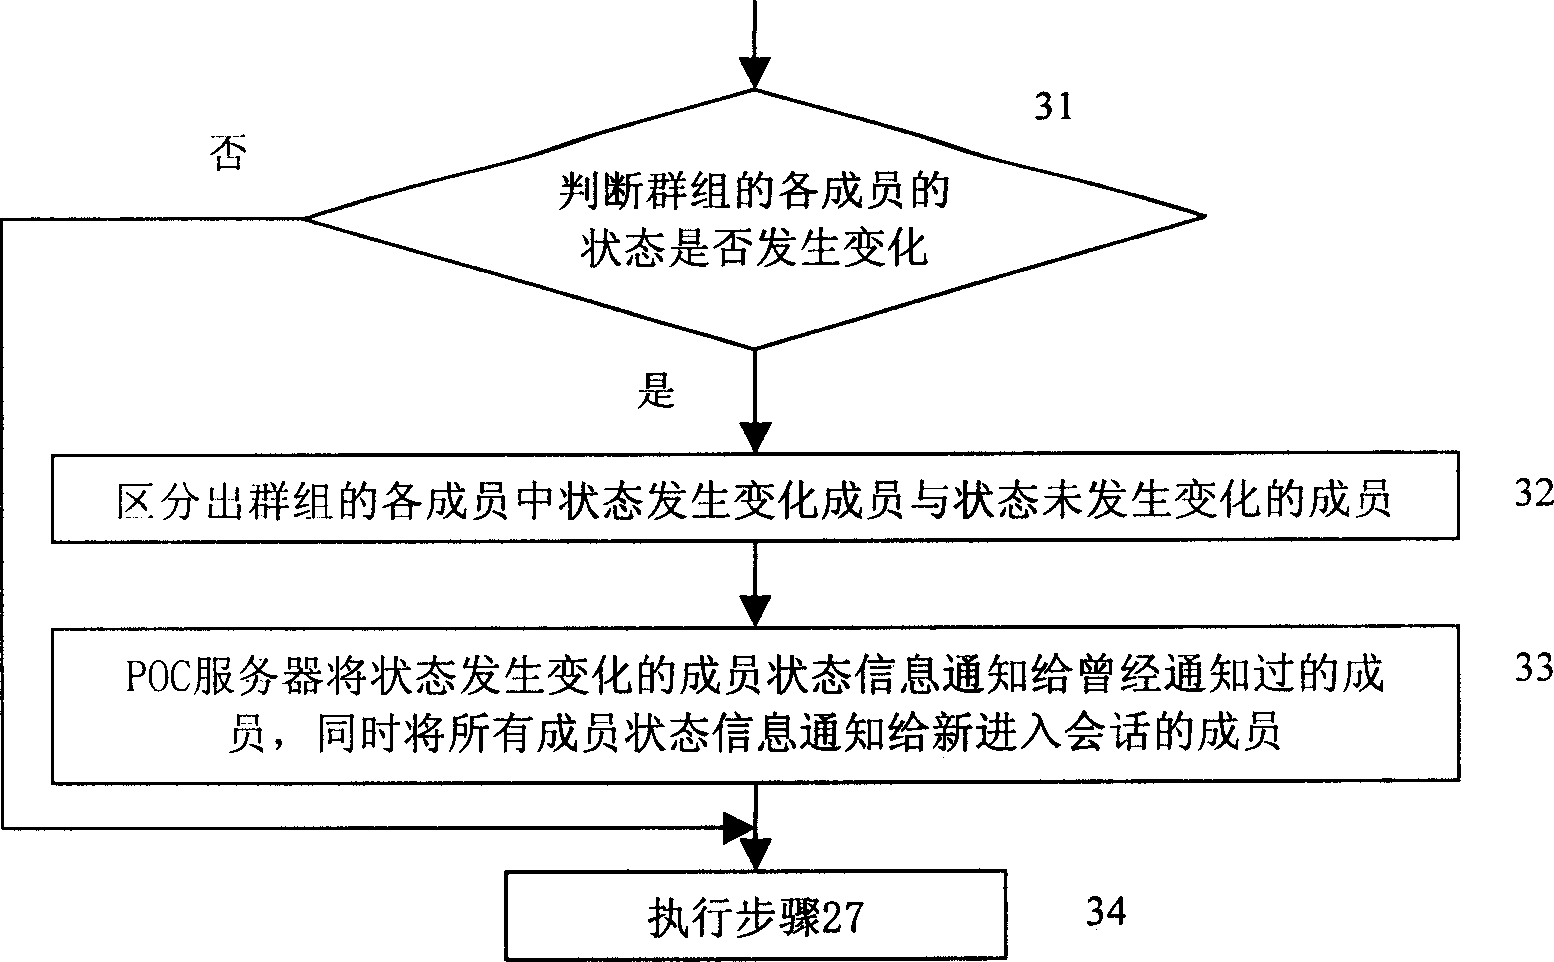 POC service group member state informing process and apparatus